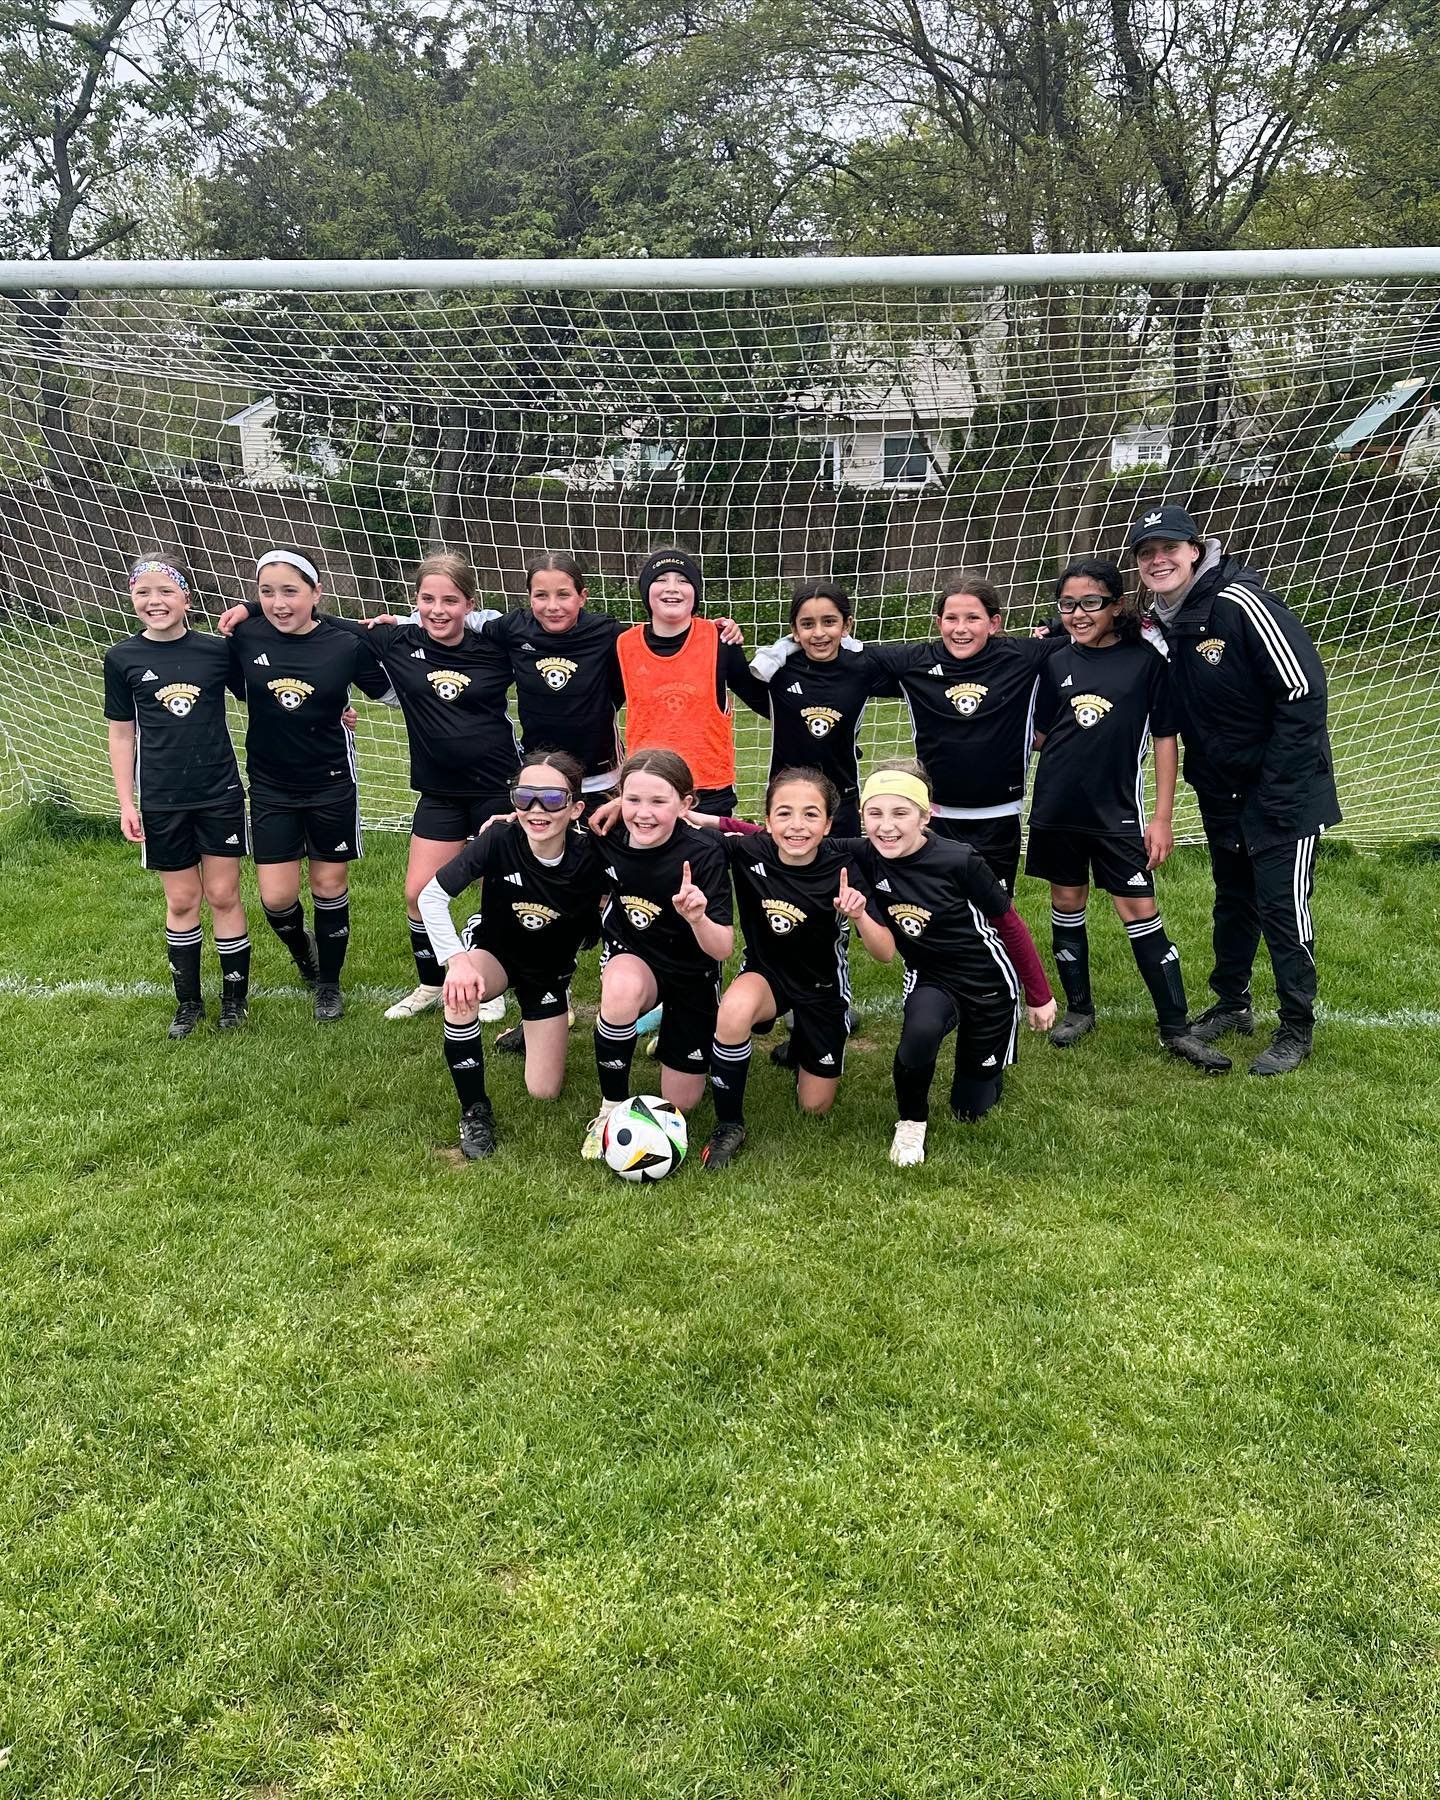 The GU10 Tigers are going to the LI Cup Semi-Finals!! Congratulations to the girls on their exciting 4-3 victory over the Smithtown Slammers today. Best of luck in the semi-finals! ⚽️ #CommackSoccer #CommackSoccerLeague #LICup #LIJSL